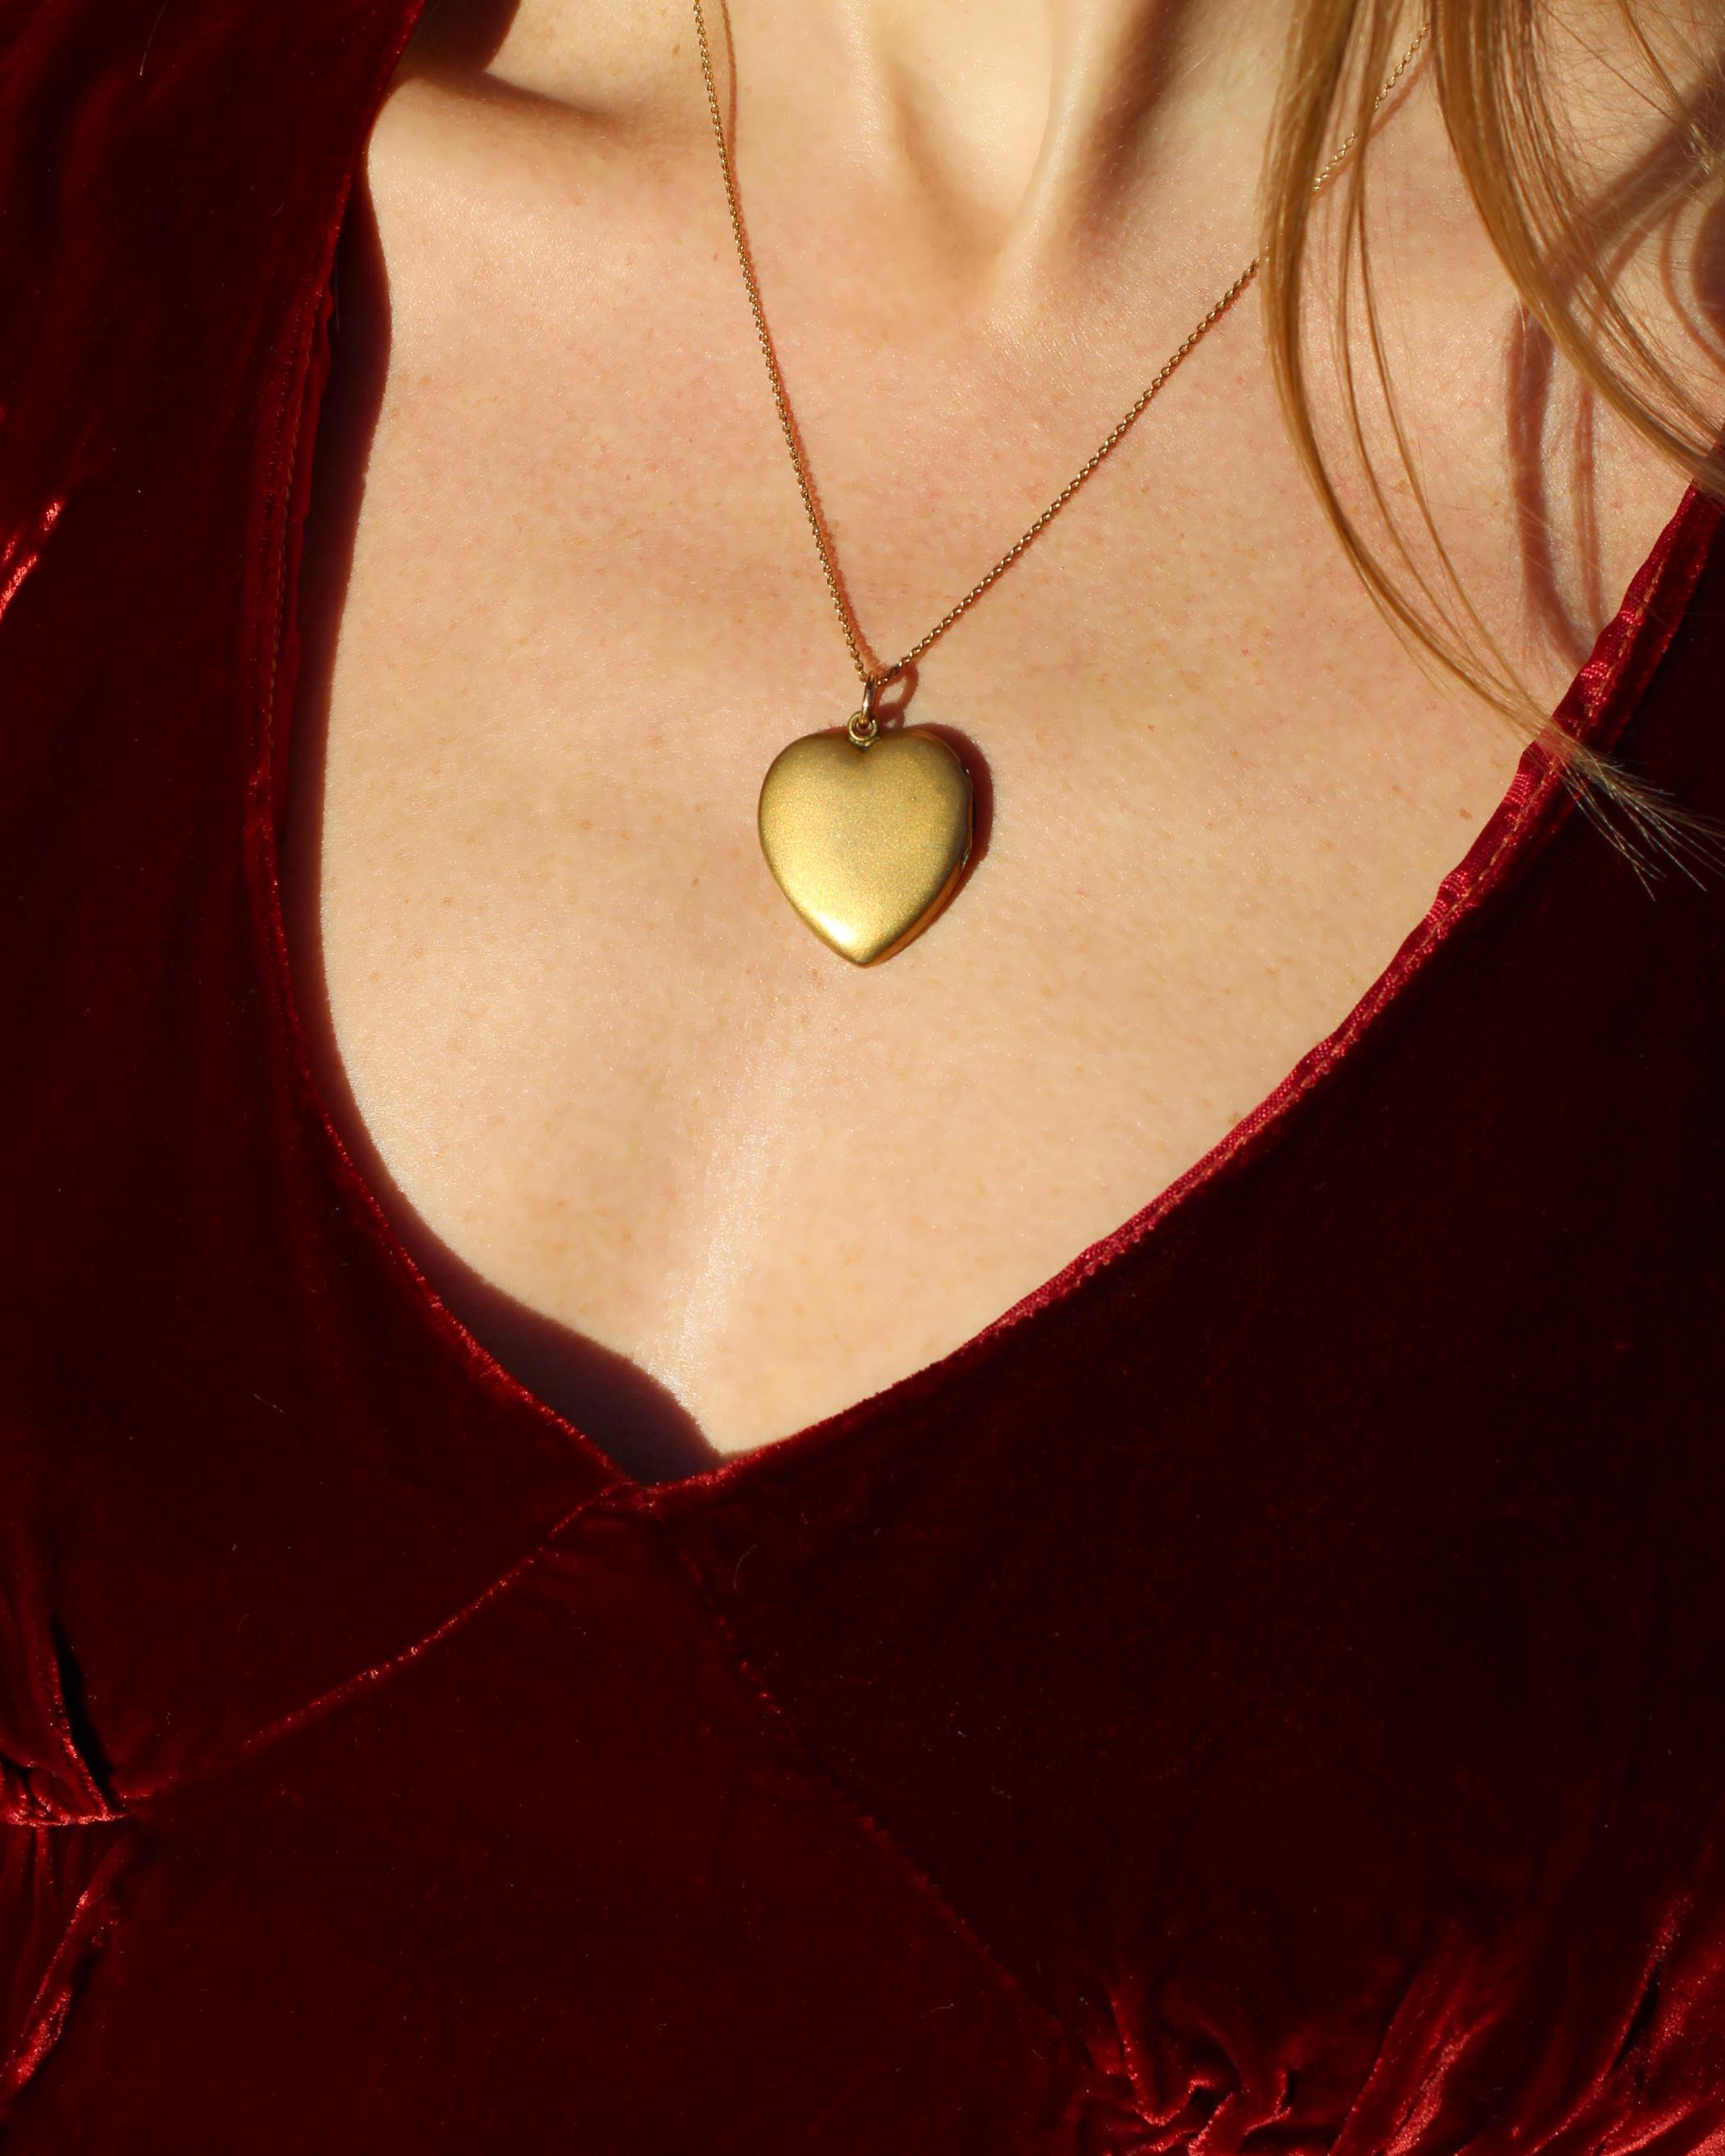 Circa 19th Century, this heart locket dates back to the Victorian era. It is so romantic and makes the perfect gift. The locket opens with hinges, and can carry a memento inside. One side is monogrammed, the other side is not engraved, and you could